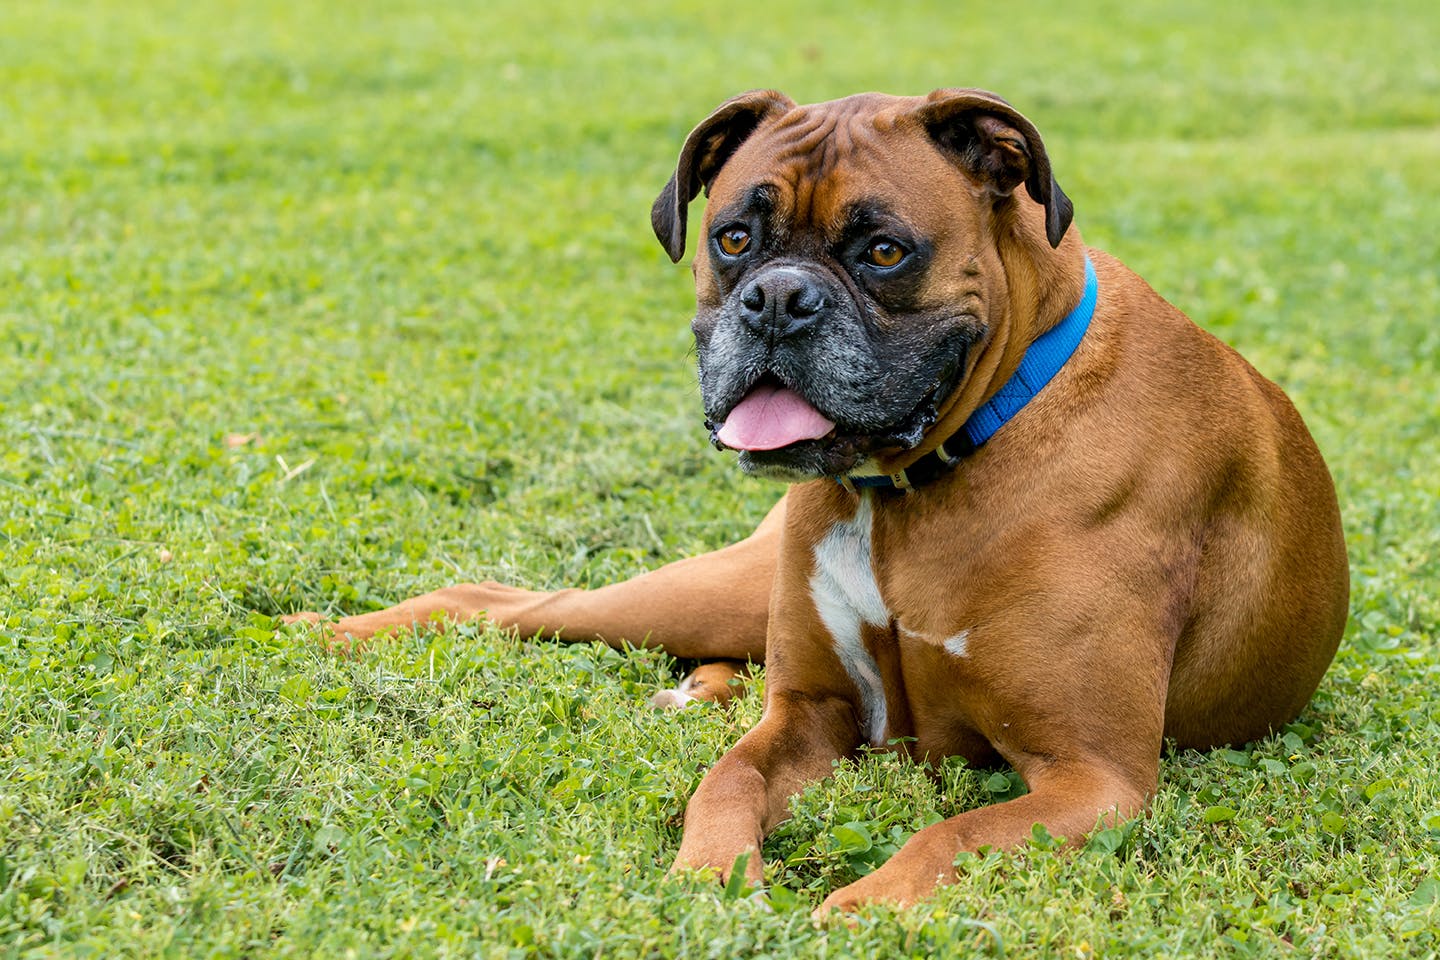 Boxer lying outside in the grass.